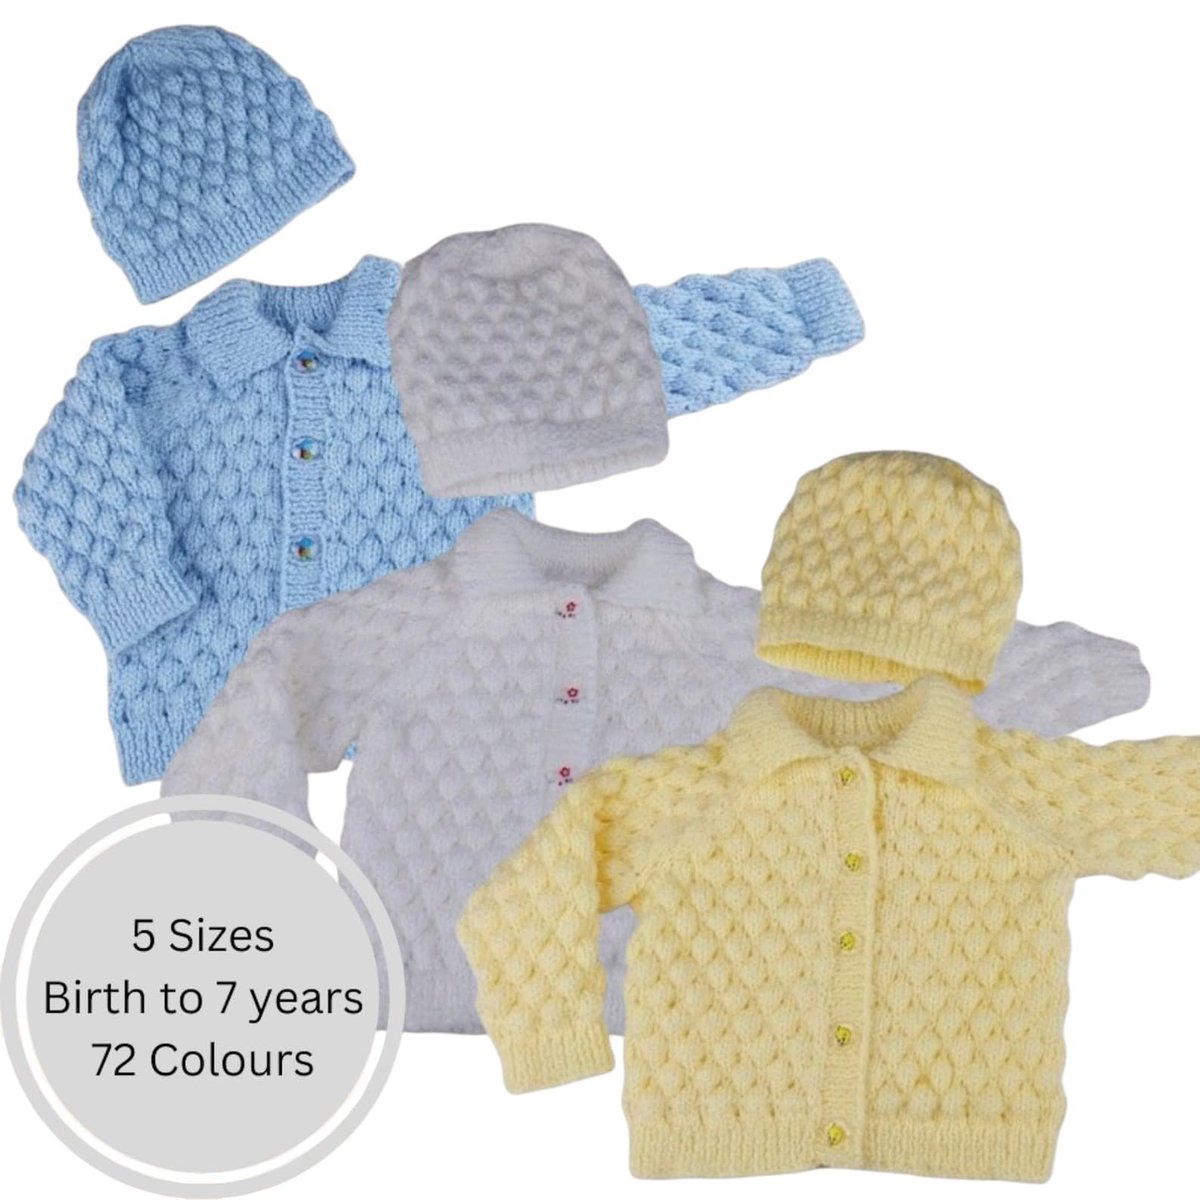 Discover the ideal baby shower gift or surprise for a new baby! Our knitted baby and children's cardigan and hat set is available in various colours and fits ages 0 to 7 years. knittingtopia.etsy.com/listing/169637… #knittingtopia #babygifts #childrensknitwear #craftbizparty #MHHSBD #tweetuk